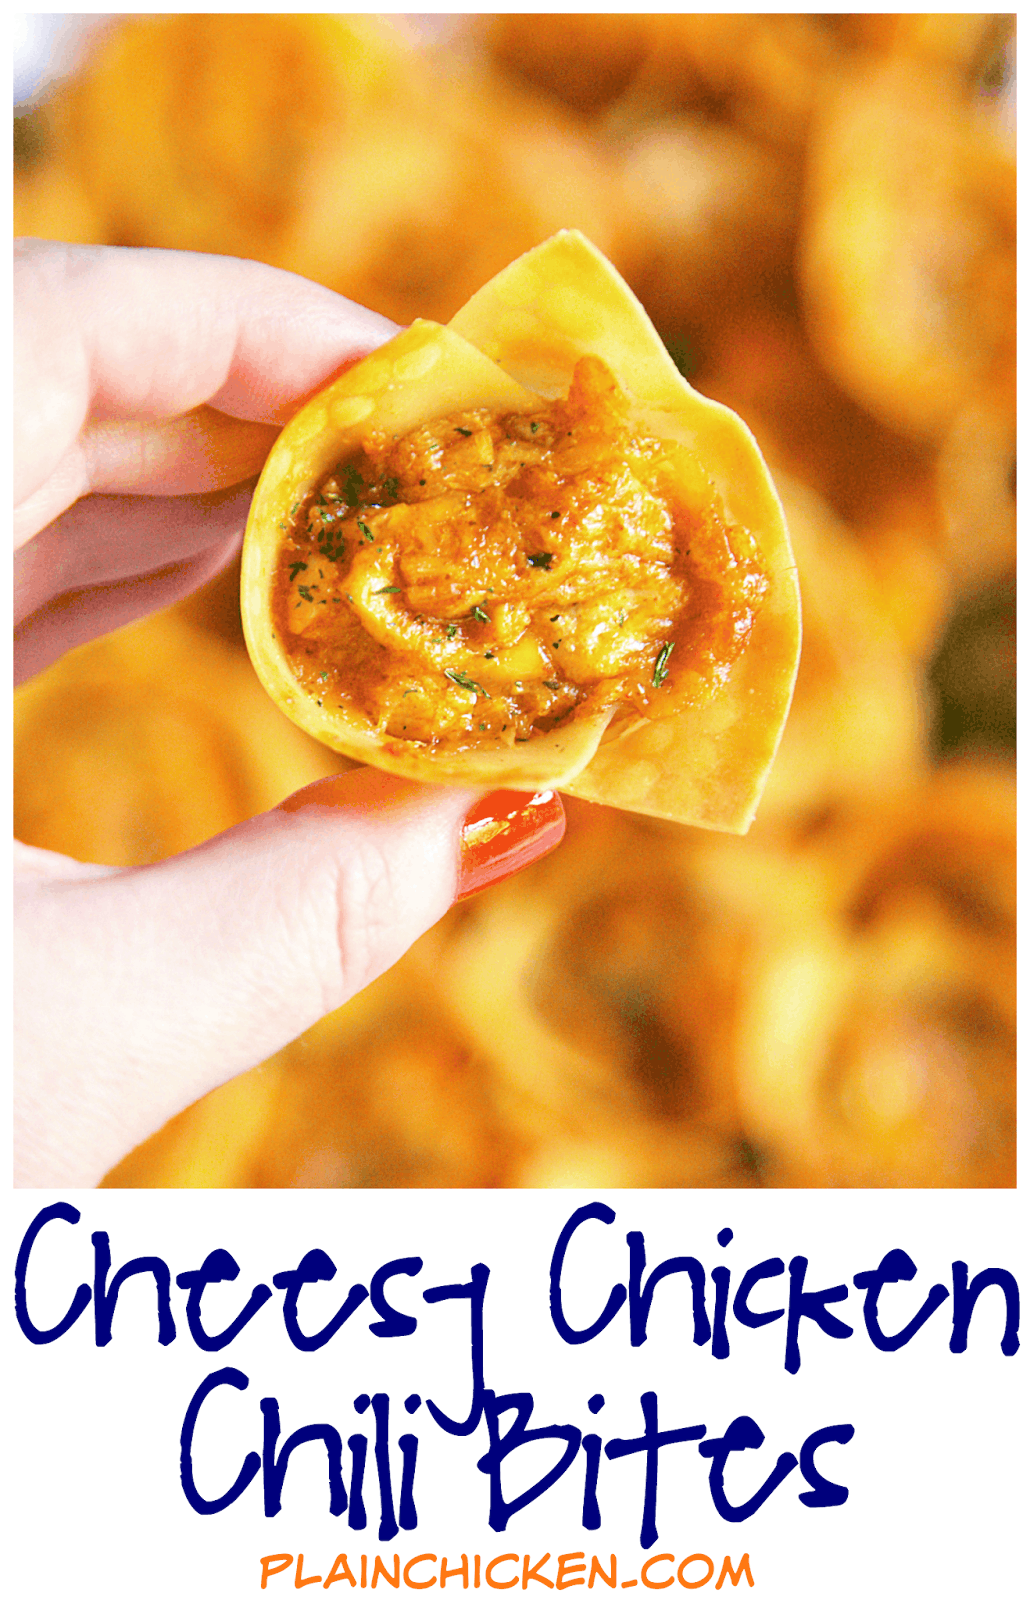 Cheesy Chicken Chili Bites - only 5 ingredients! Chicken, chili seasoning, ranch, cheese baked in wonton wrappers. I ate way too many of these!! SO good. Can make filling ahead of time and refrigerate. Great for parties and tailgates. Tastes great warm or at room temperature.